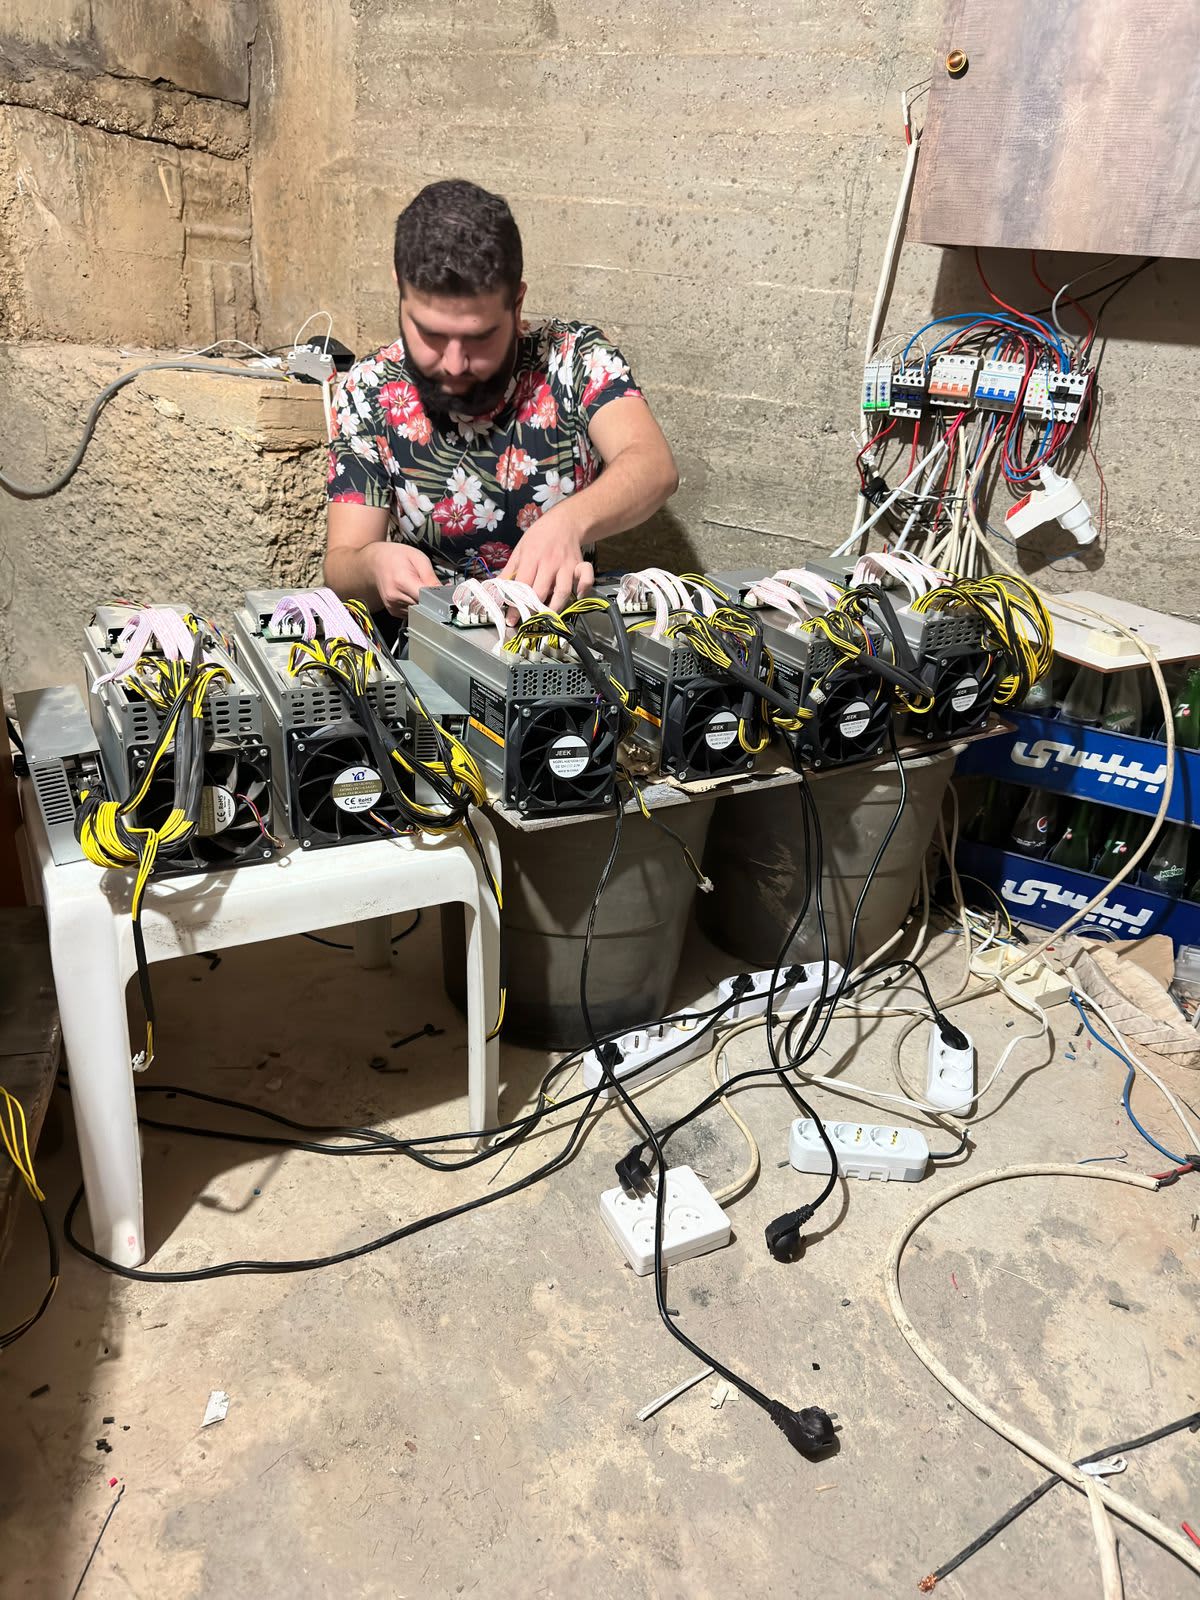 Want to Mine Bitcoin at Home? DIY Bitcoiners Have Stories to Share